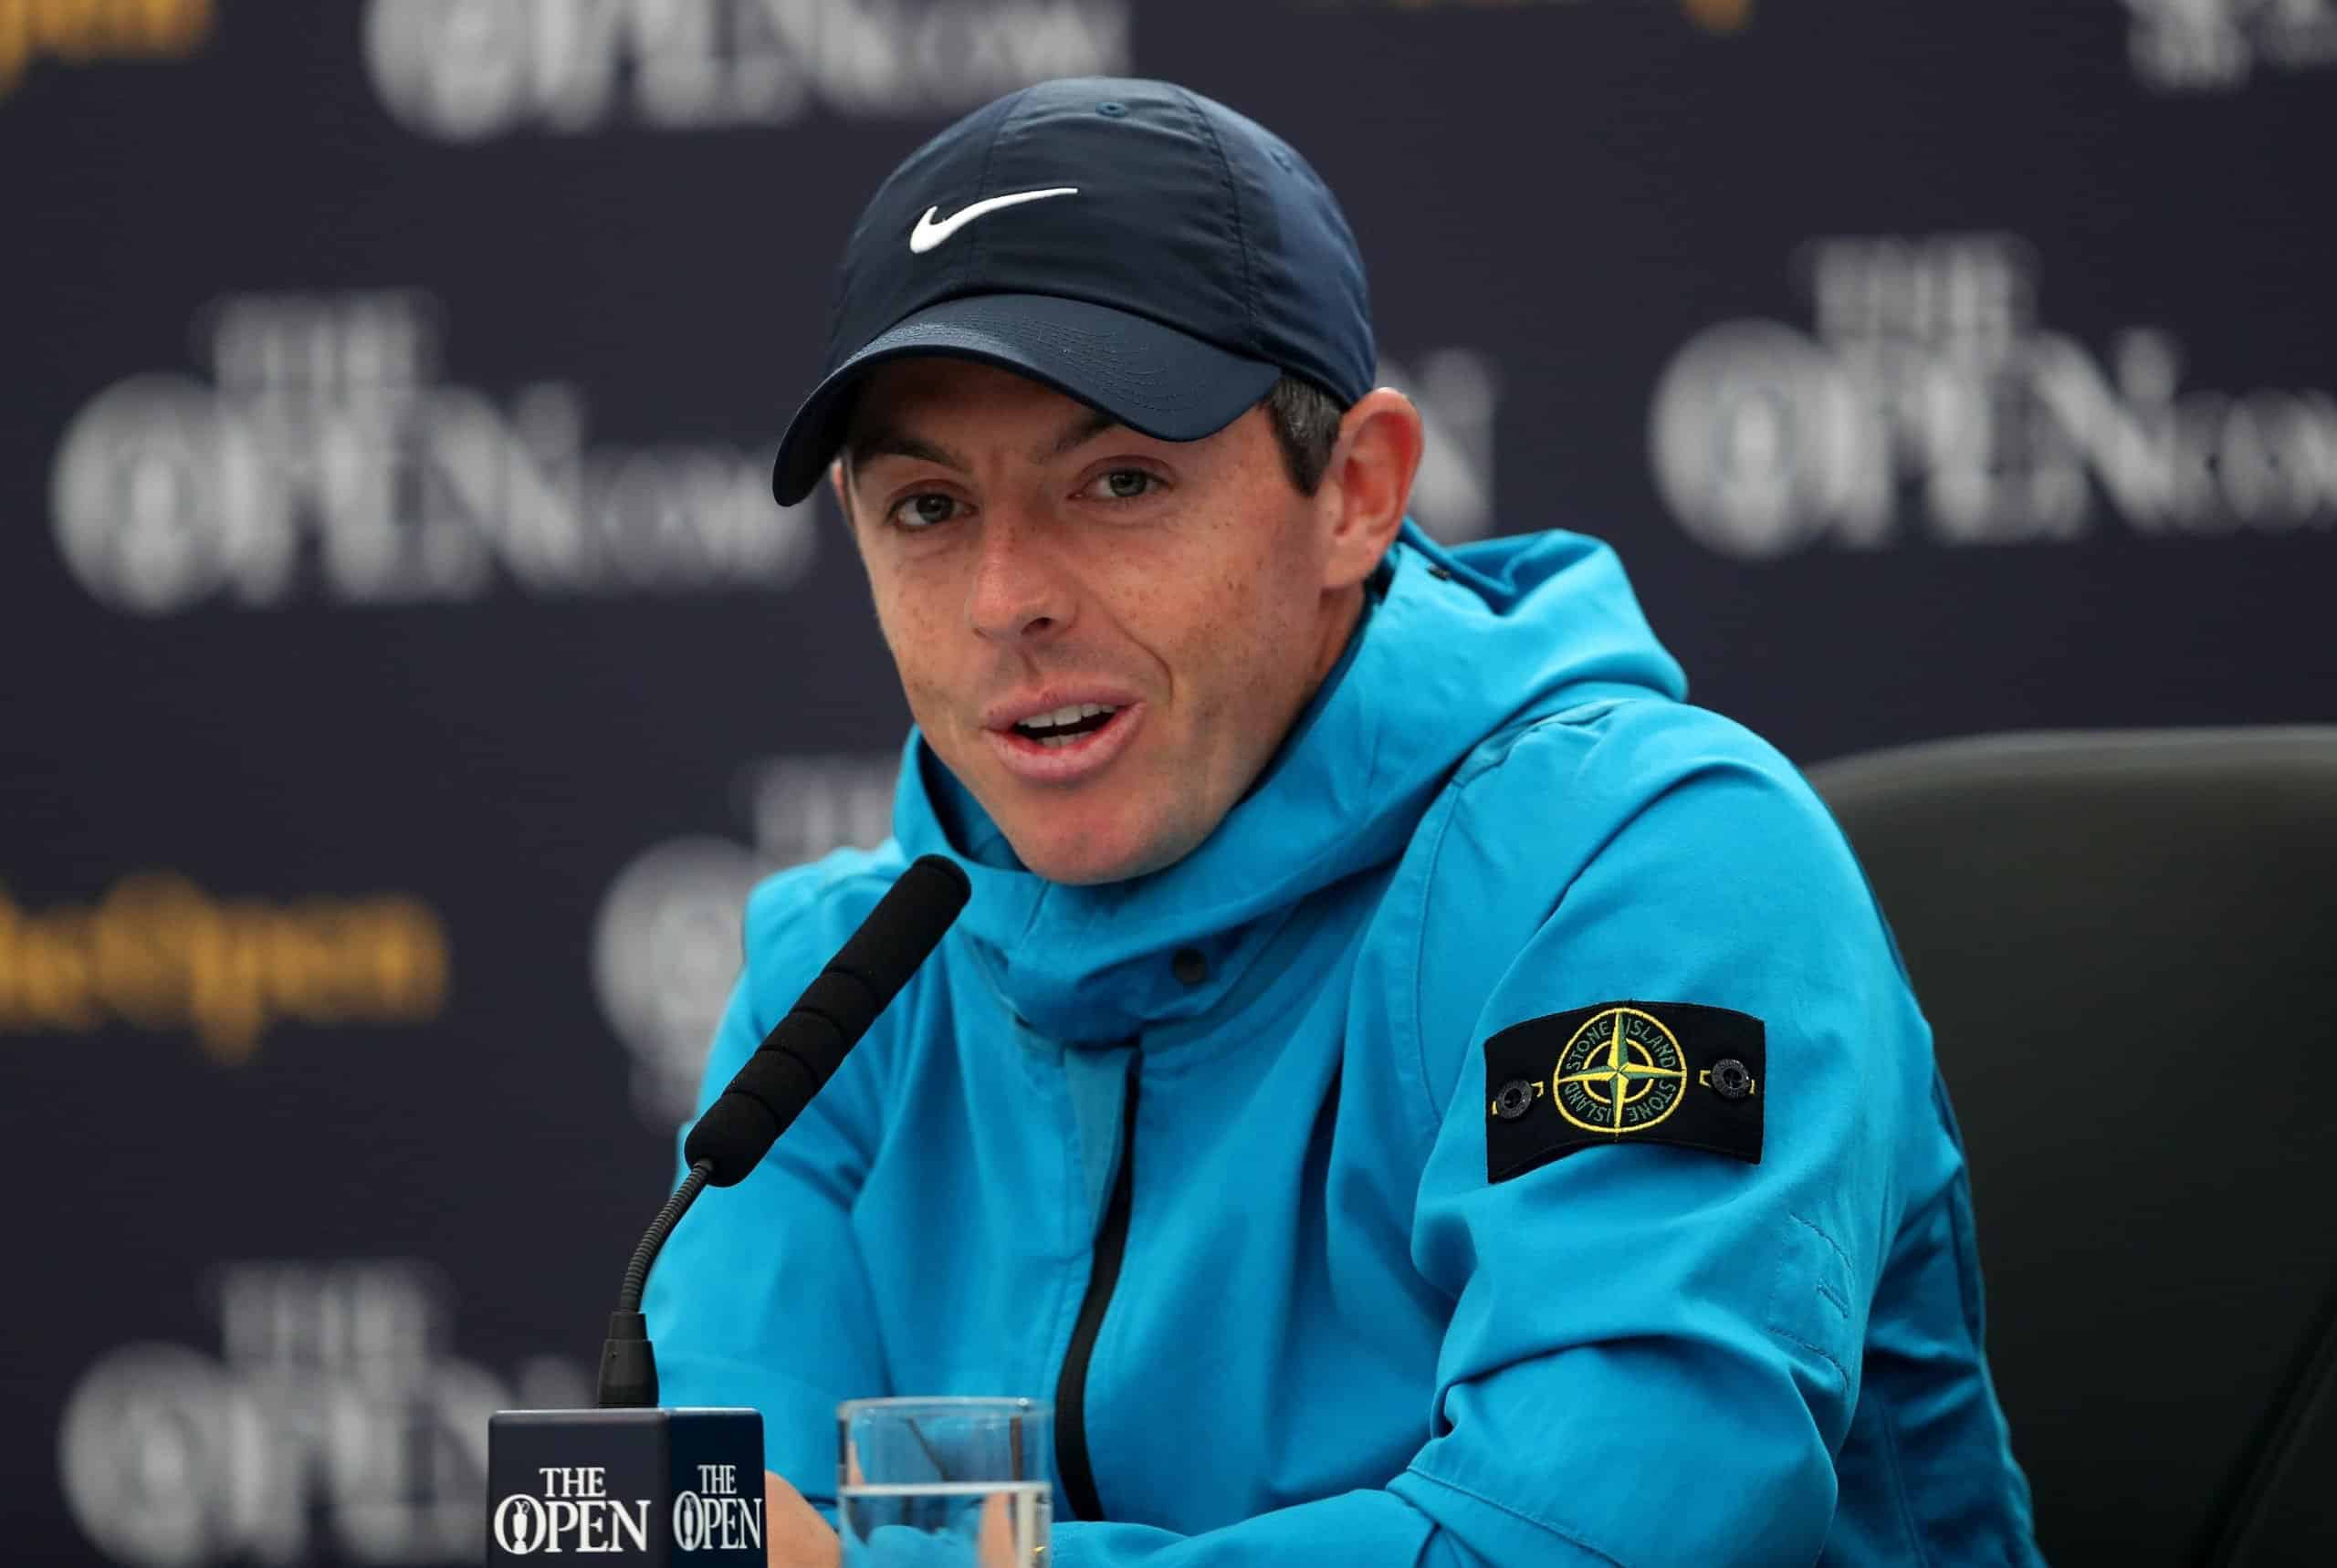 McIlroy to LIV? It’s looking like an odds-on possibility